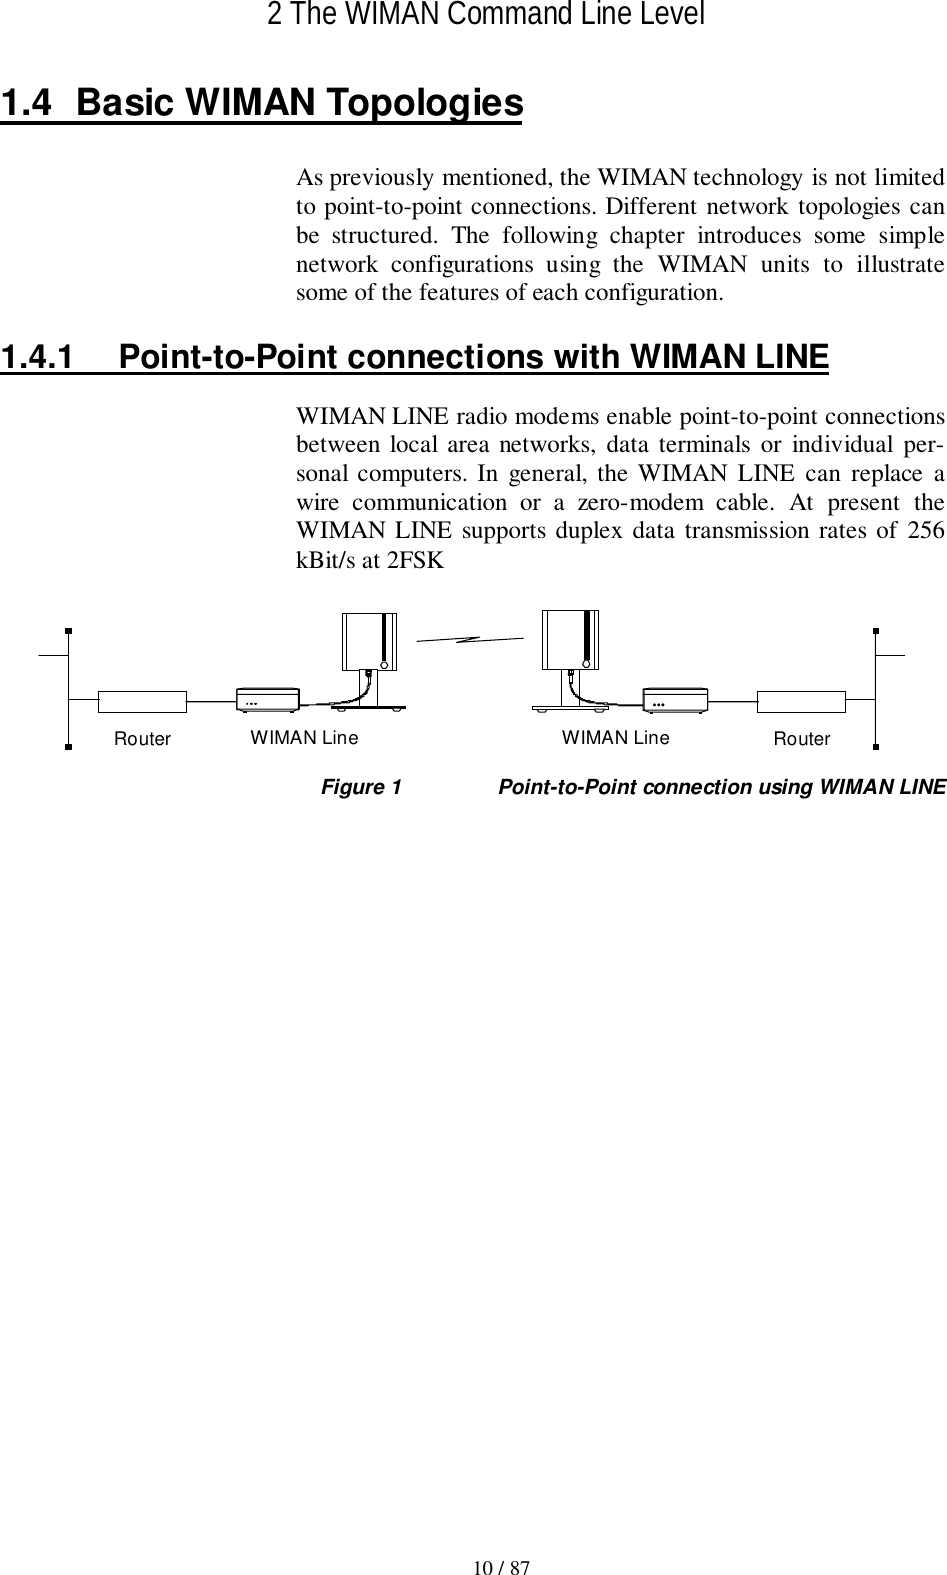 2 The WIMAN Command Line Level10 / 871.4  Basic WIMAN TopologiesAs previously mentioned, the WIMAN technology is not limitedto point-to-point connections. Different network topologies canbe structured. The following chapter introduces some simplenetwork configurations using the WIMAN units to illustratesome of the features of each configuration.1.4.1  Point-to-Point connections with WIMAN LINEWIMAN LINE radio modems enable point-to-point connectionsbetween local area networks, data terminals or individual per-sonal computers. In general, the WIMAN LINE can replace awire communication or a zero-modem cable. At present theWIMAN LINE supports duplex data transmission rates of 256kBit/s at 2FSK WIMAN LineRouter WIMAN Line RouterFigure 1 Point-to-Point connection using WIMAN LINE